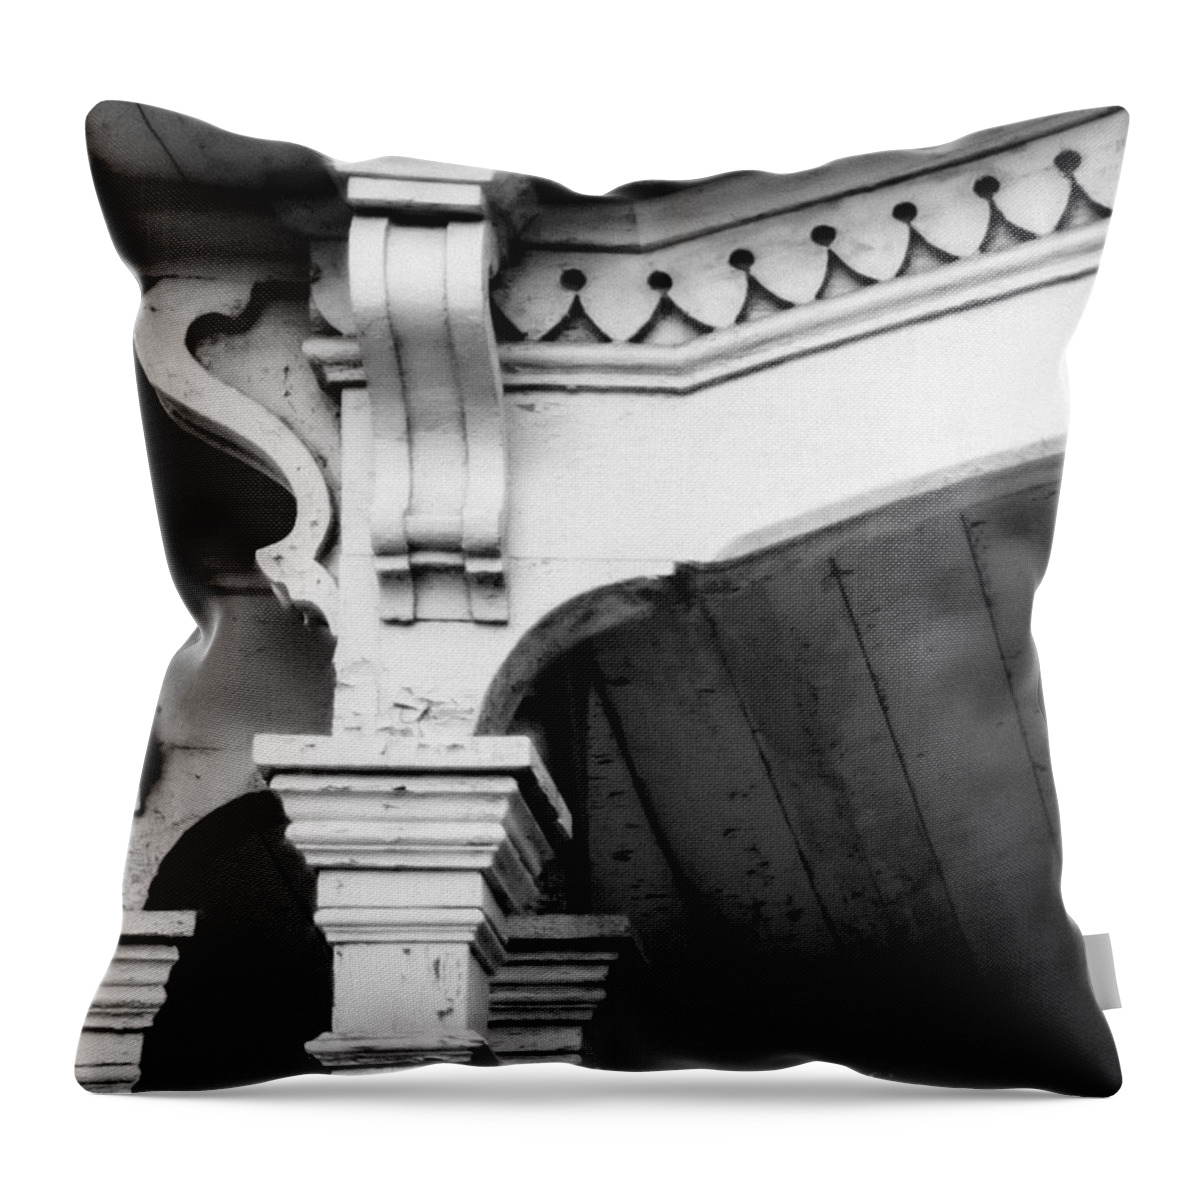 Trim Throw Pillow featuring the photograph Victorian Moulding by Pamela Taylor